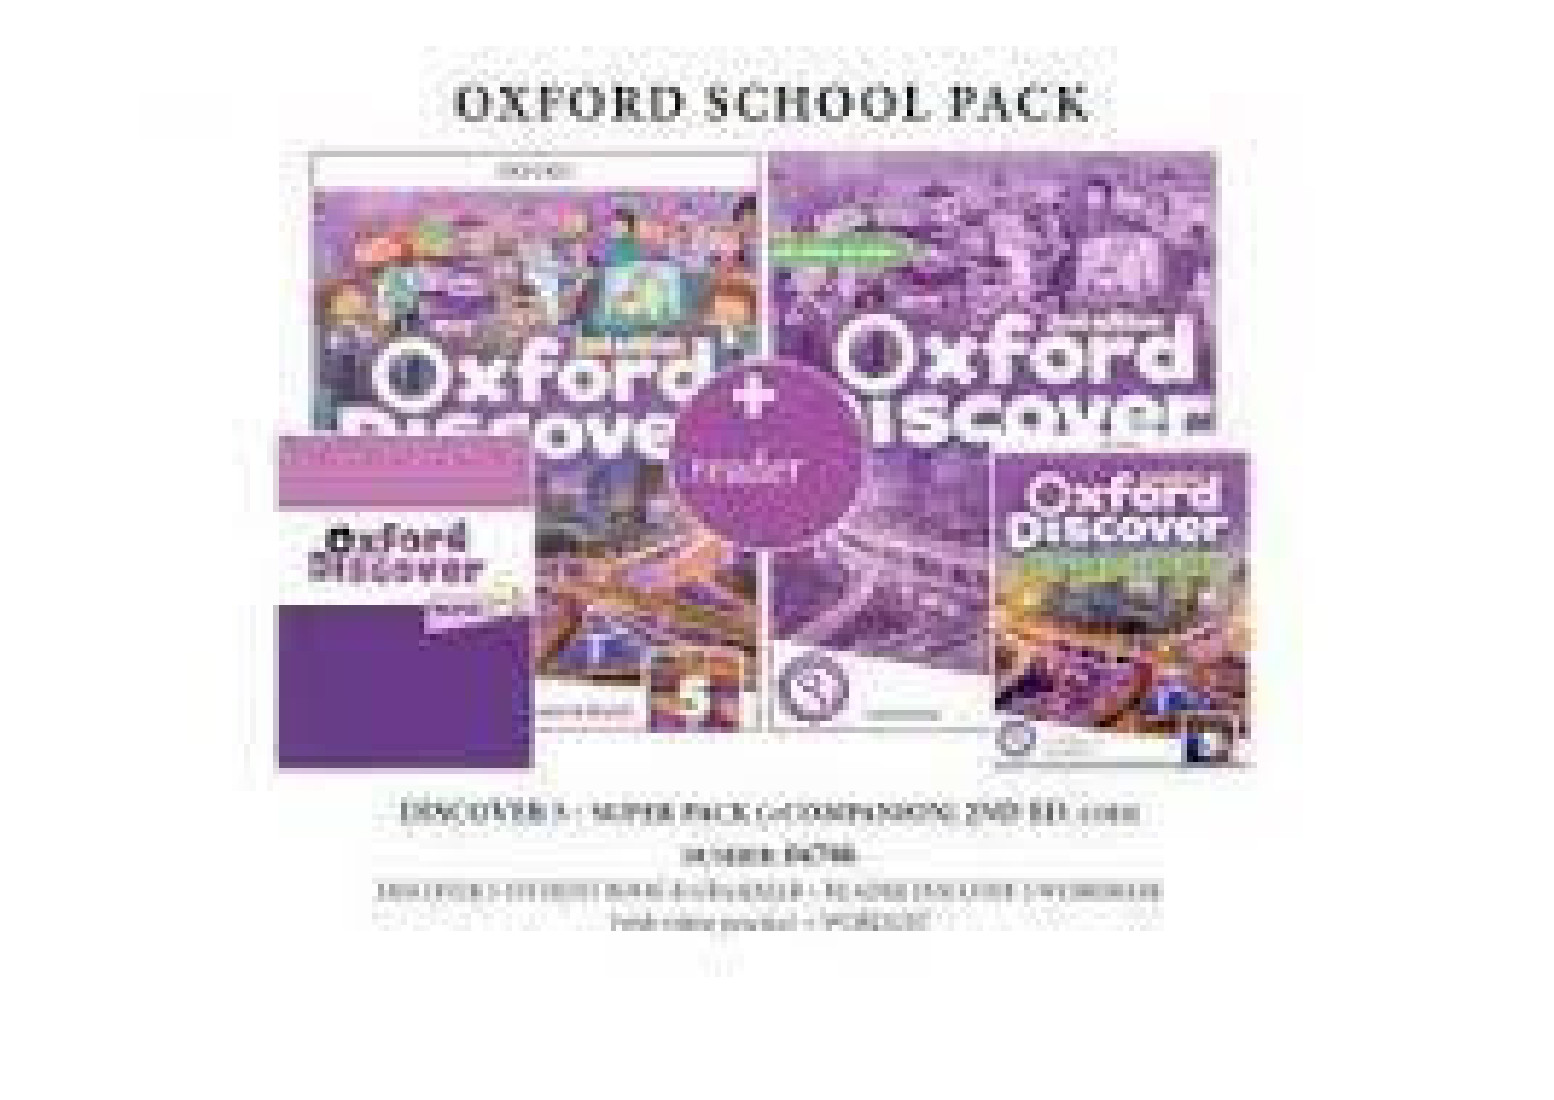 OXFORD DISCOVER 5 SUPER PACK (+ COMPANION) - 04706 2ND ED